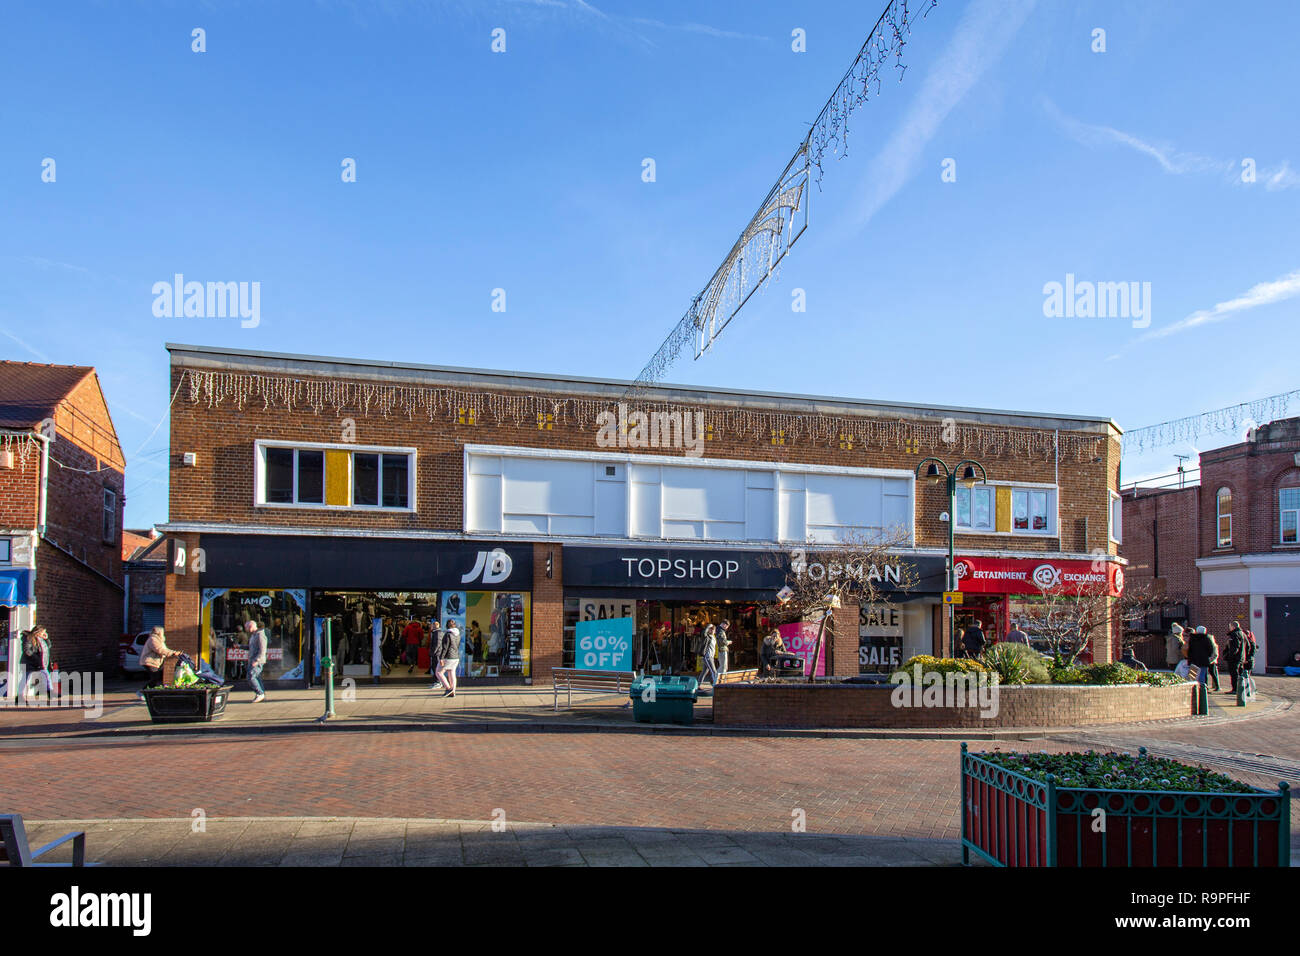 Cex entertaiment, JD sportswear and Topshop Topman fashion shops on  Queensway town centre in Crewe Cheshire UK Stock Photo - Alamy